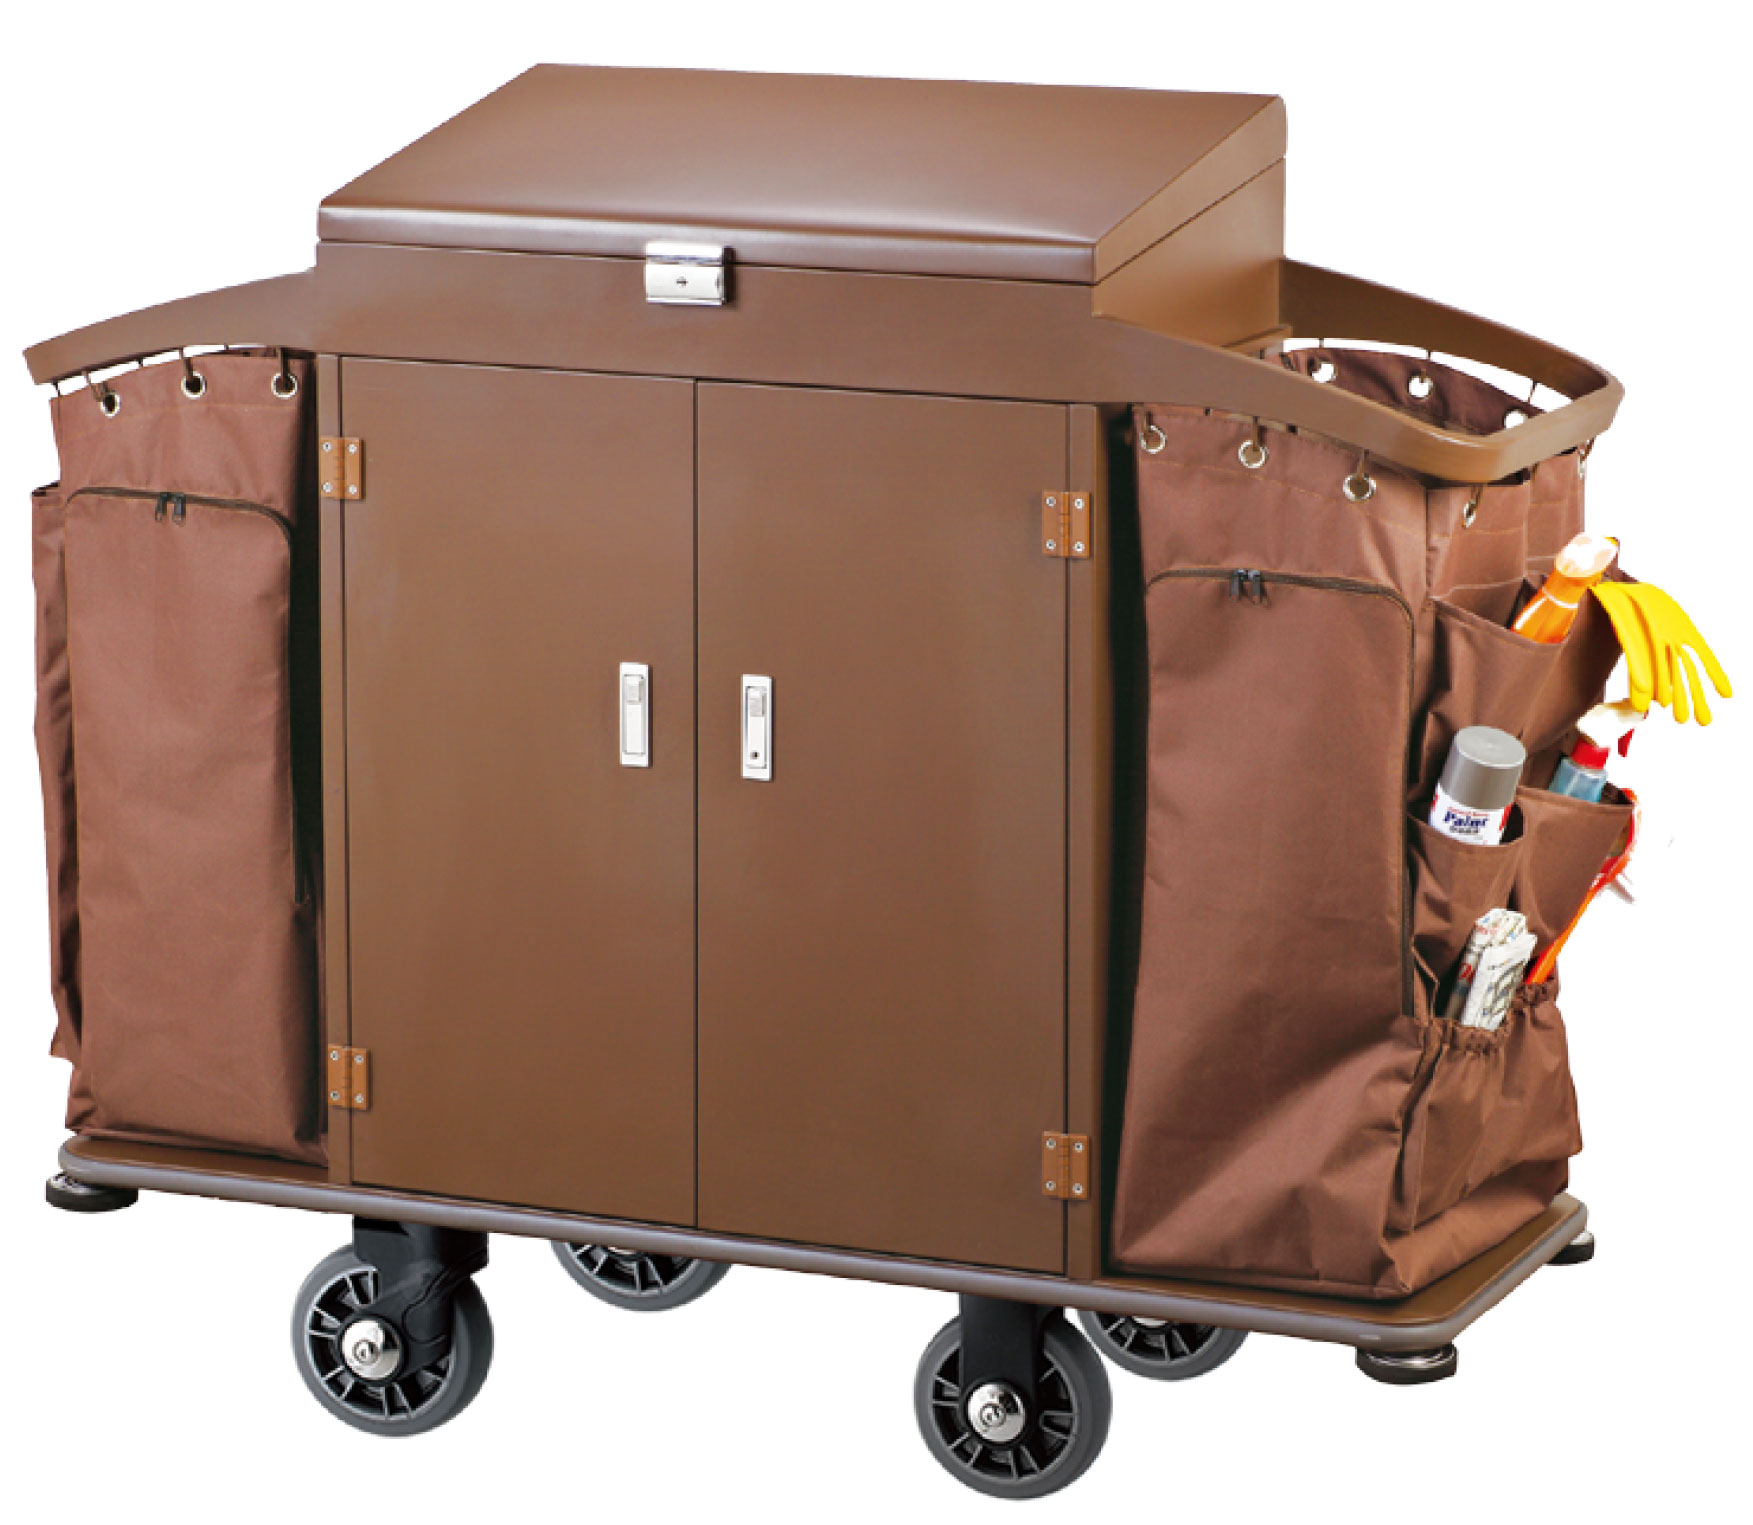 Full Size Cleaning Cart, Hotel Housekeeping Supplies